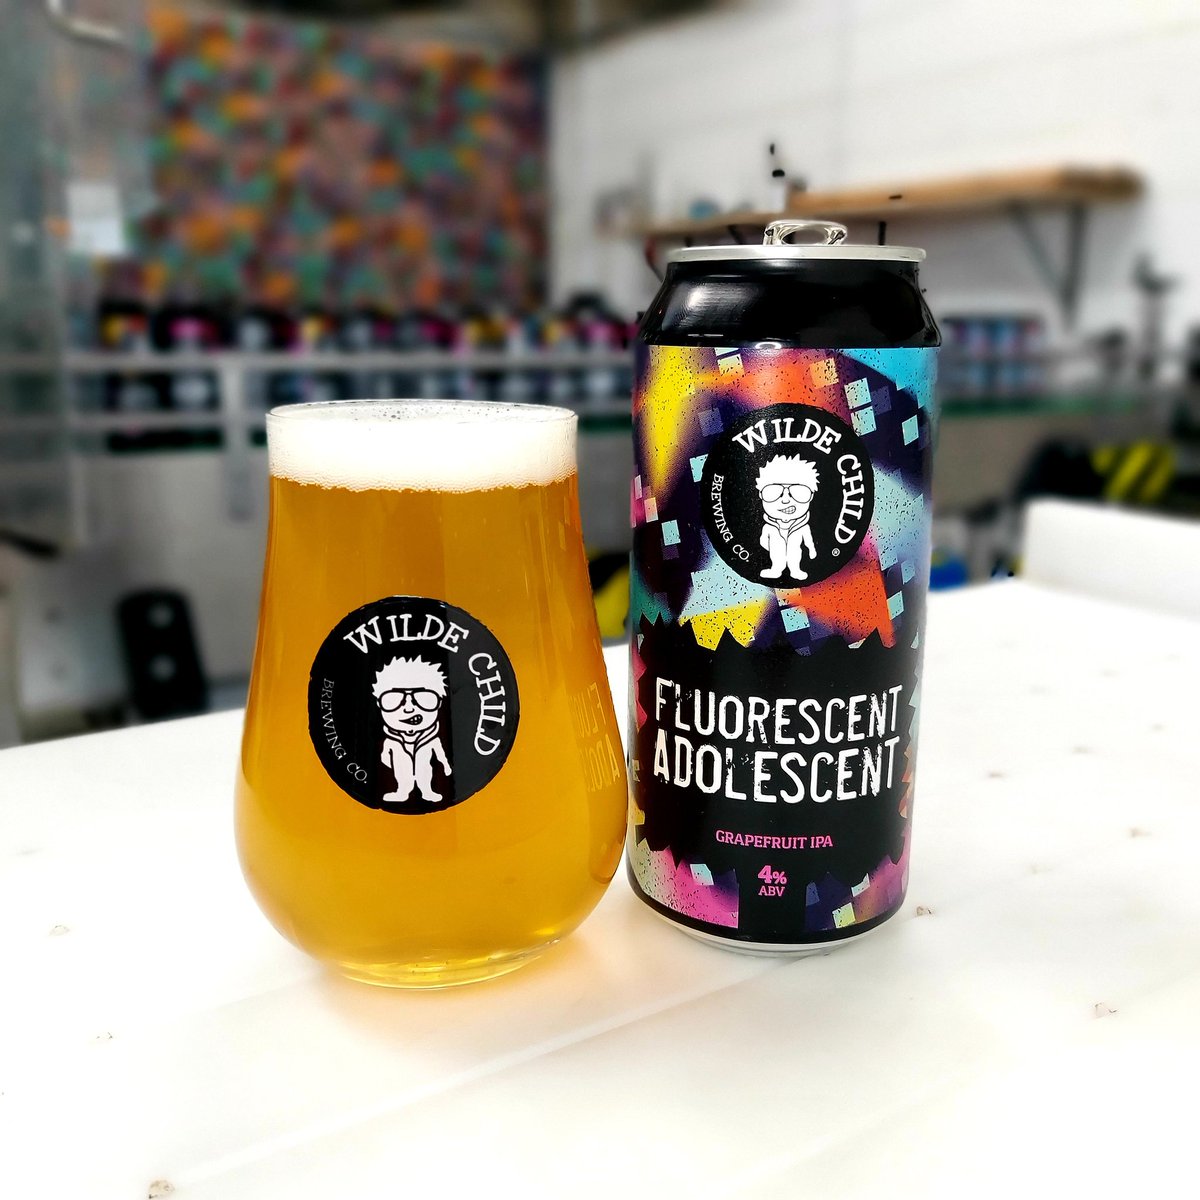 DROPPING LIKE IT'S HOT AND STRAIGHT OFF THE CANNING LINE TODAY. Fluorescent Adolescent 4% Grapefruit Pale Ale. Made with Centennial and Cascade hops and more Grapefruit than you can shake a market fruit stall at. Available NOW online and in-store 🤟🔥🥰🍺